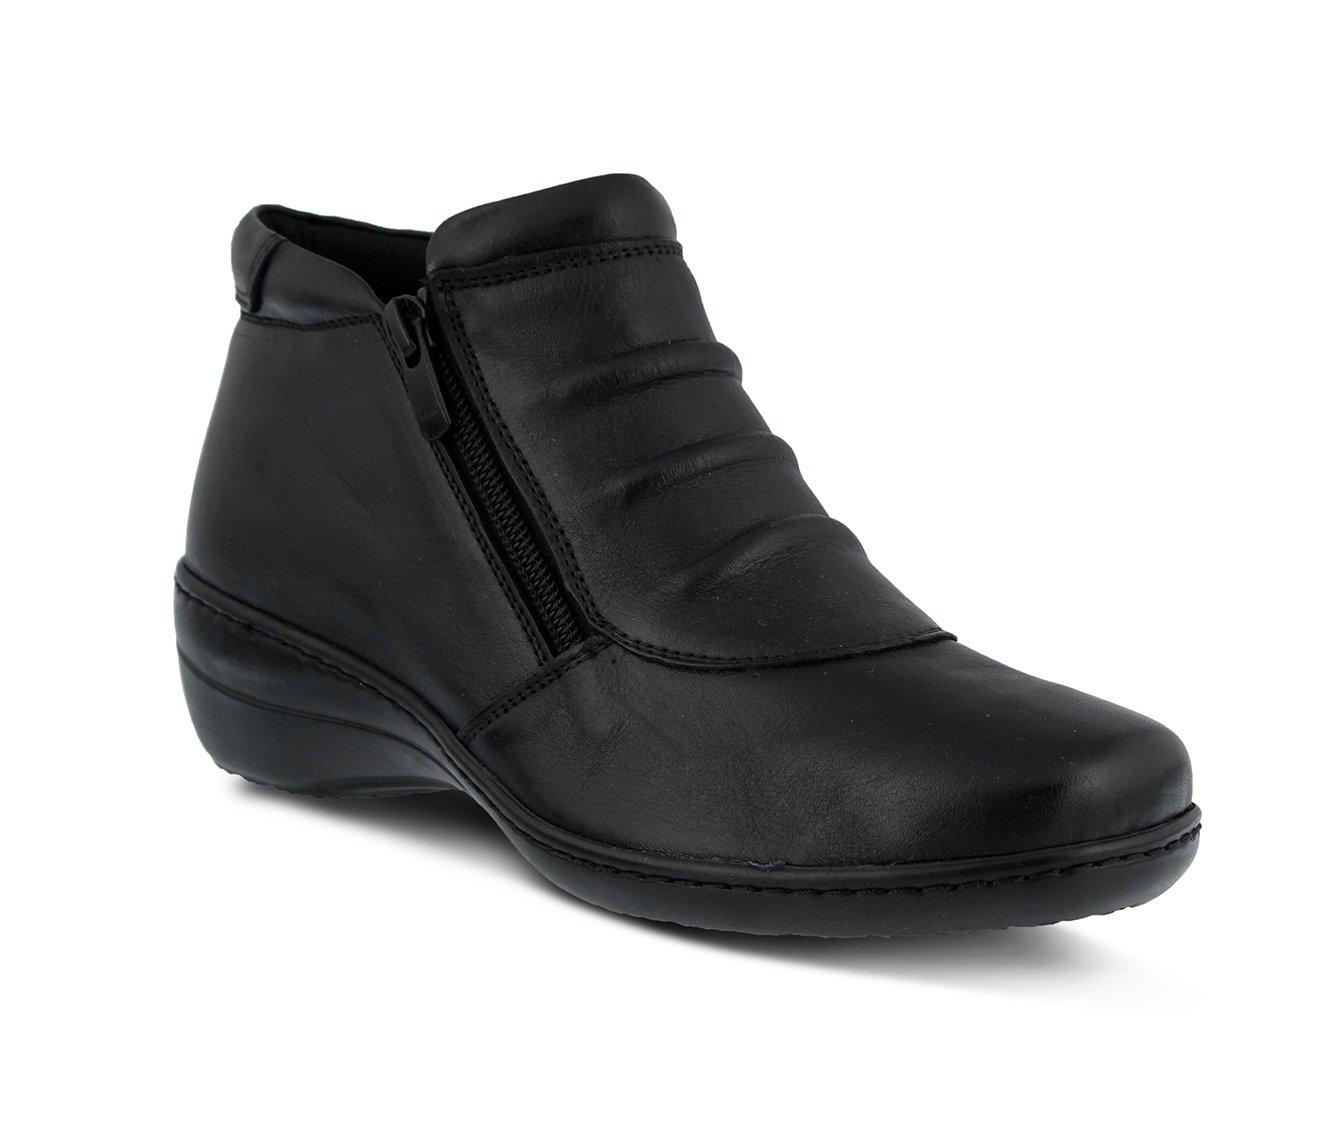 Women's SPRING STEP Briony Booties